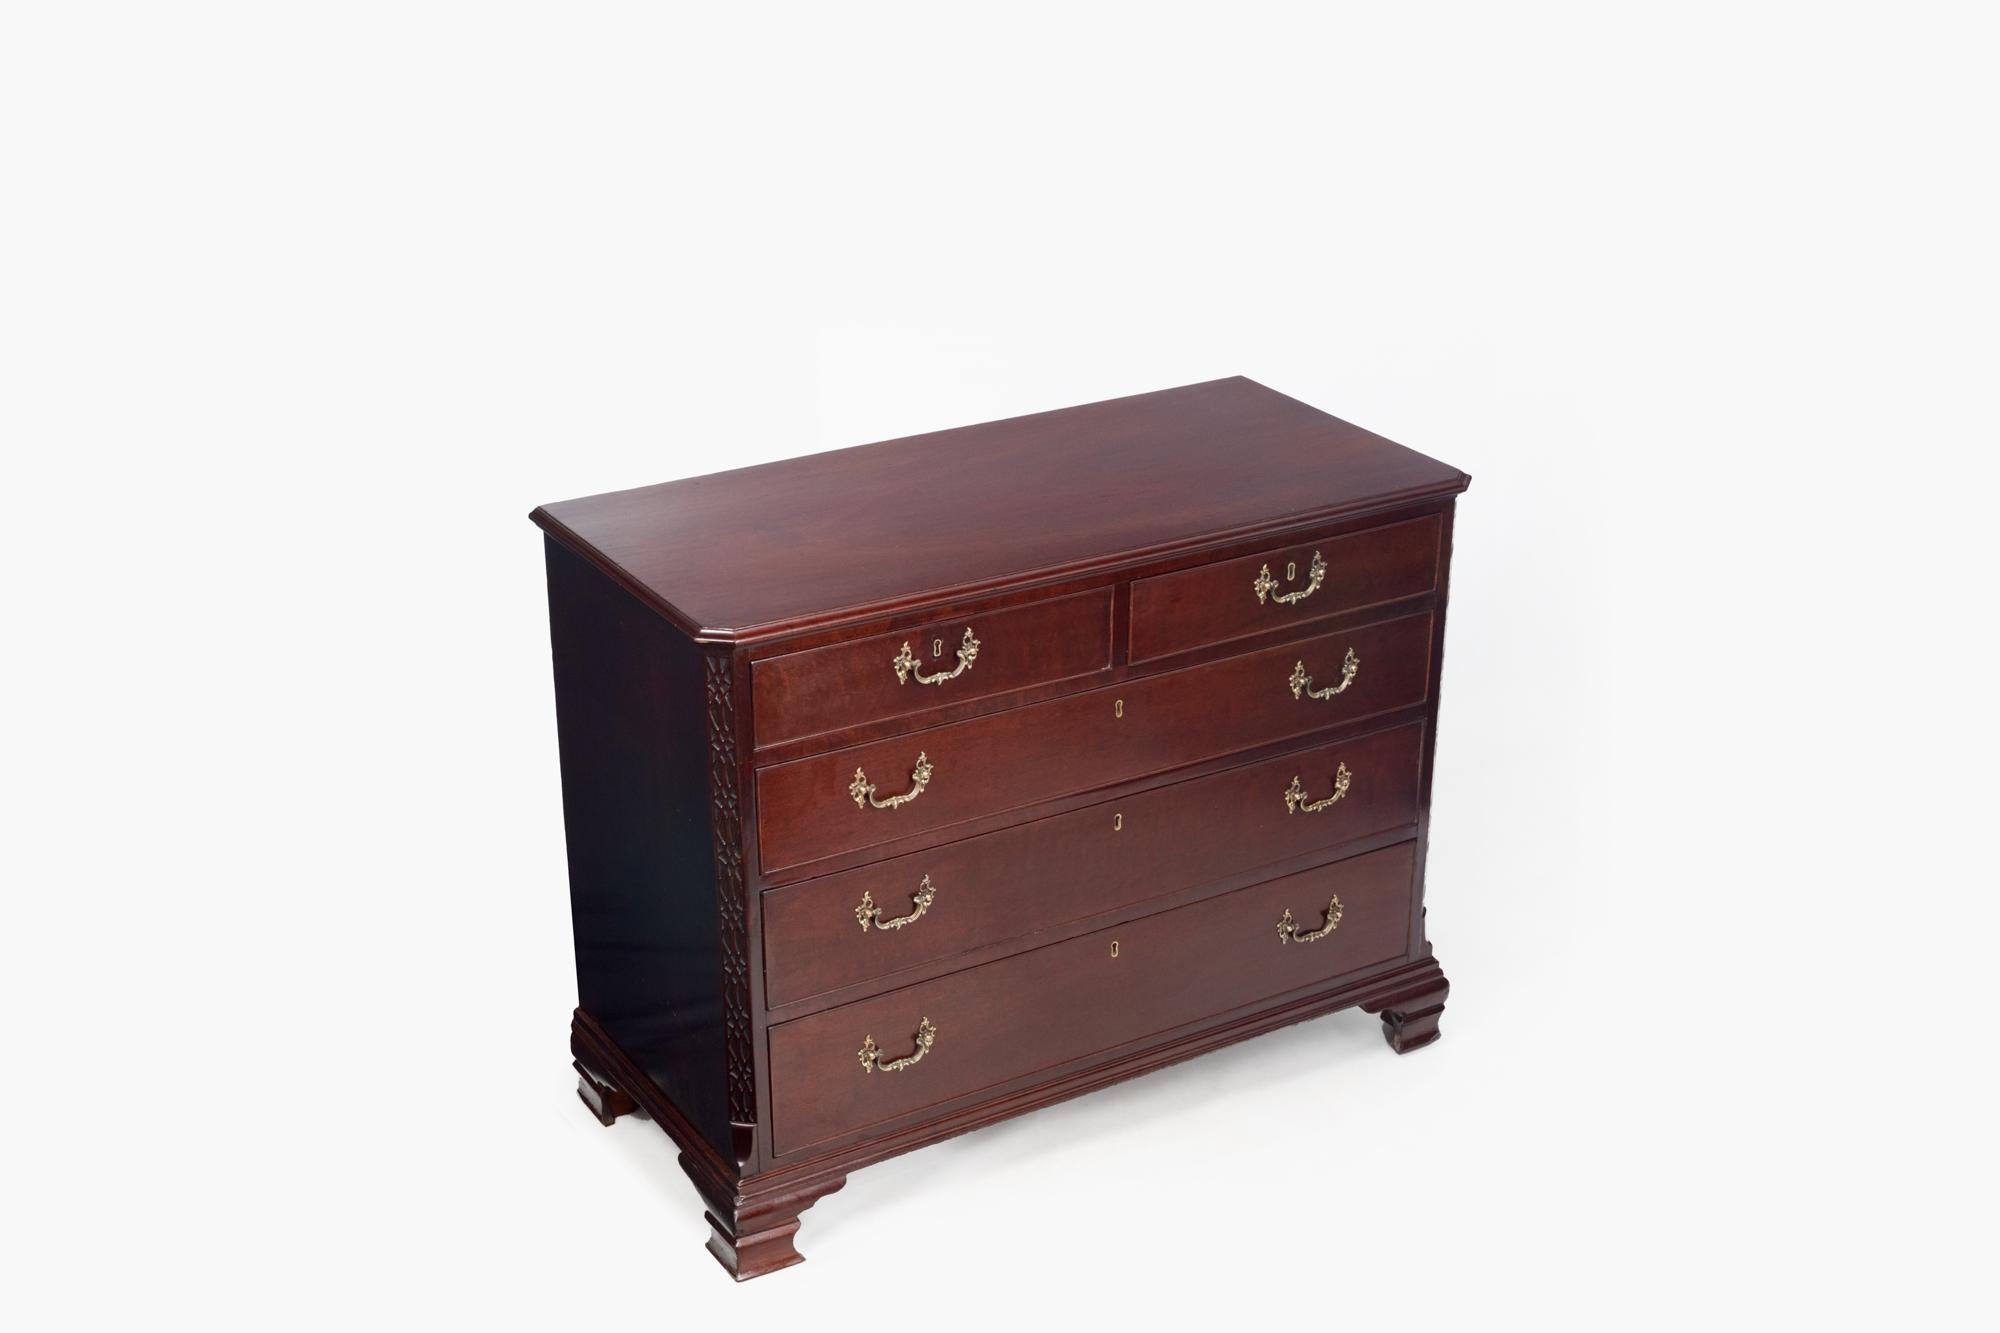 19th Century Georgian mahogany commode. Two small drawers sit above three large drawers each with pierced swan neck handles and brass escuteons. Blind fretwork pillars add detail to either side of the drawers with the piece raised on simple ogee